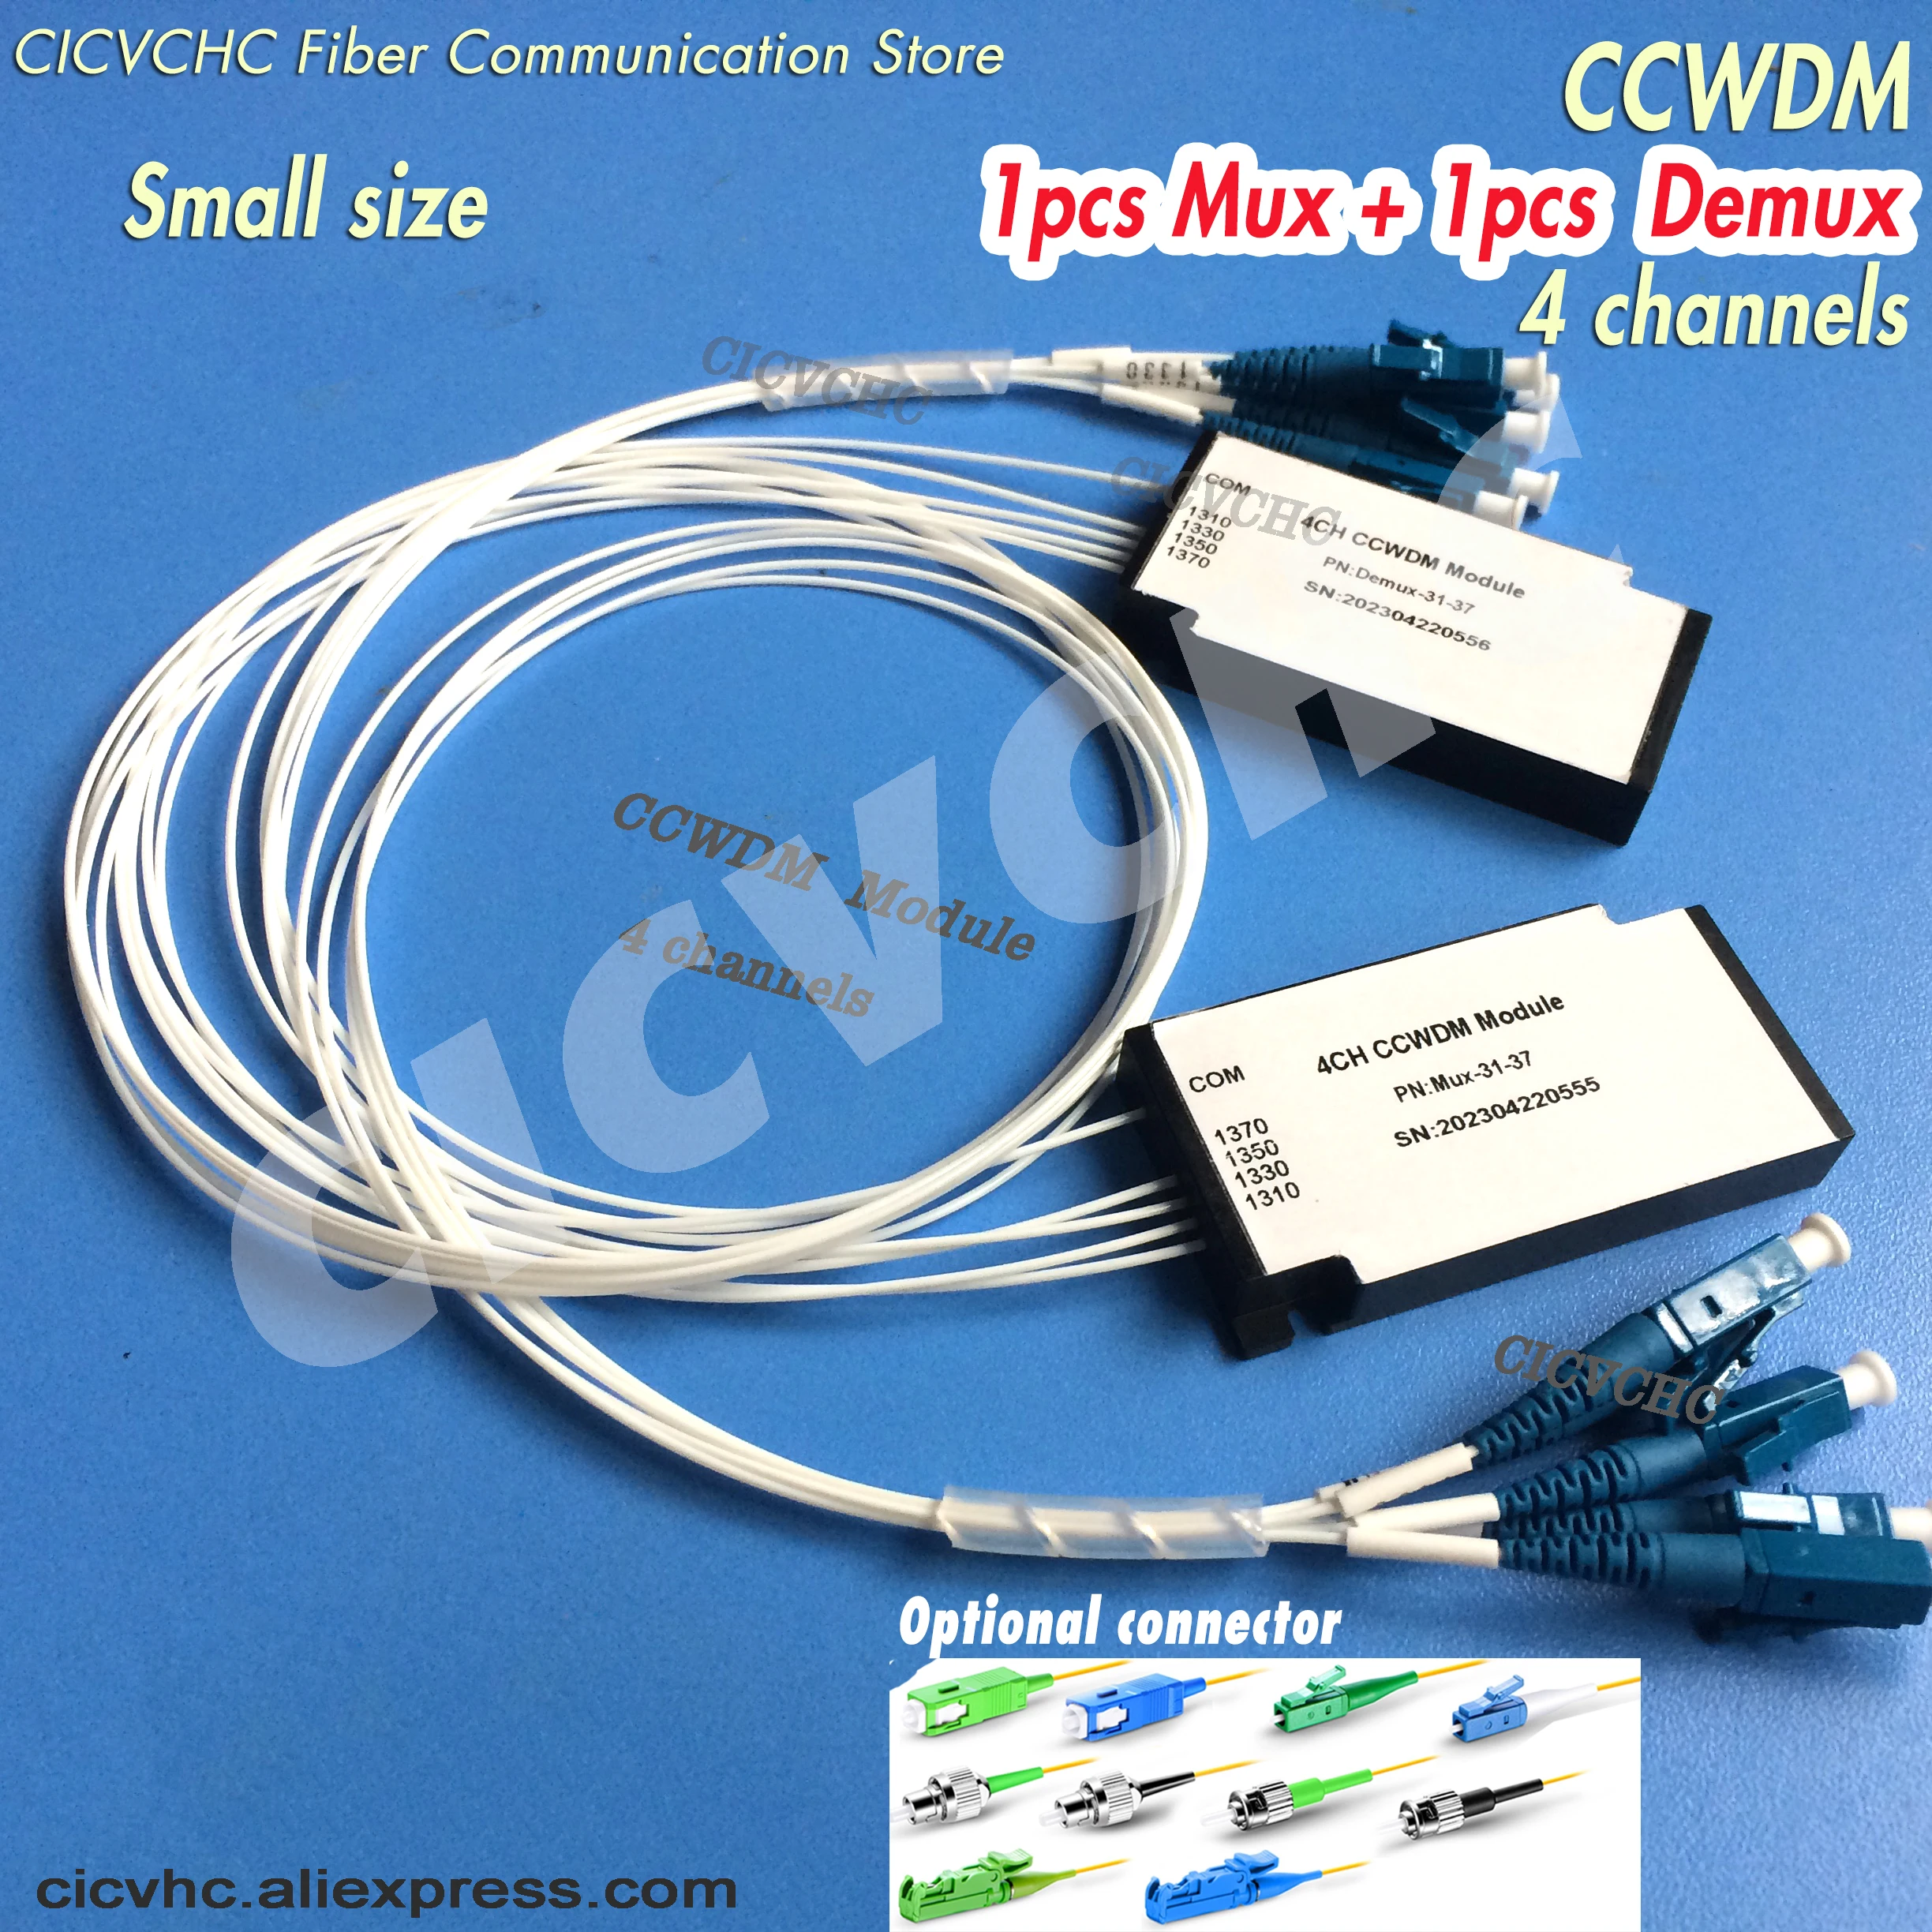 

CCWDM module 4 Channels with Free-space Compact CWDM Mux+Demux with LC, SC, FC, ST, E2000 connector